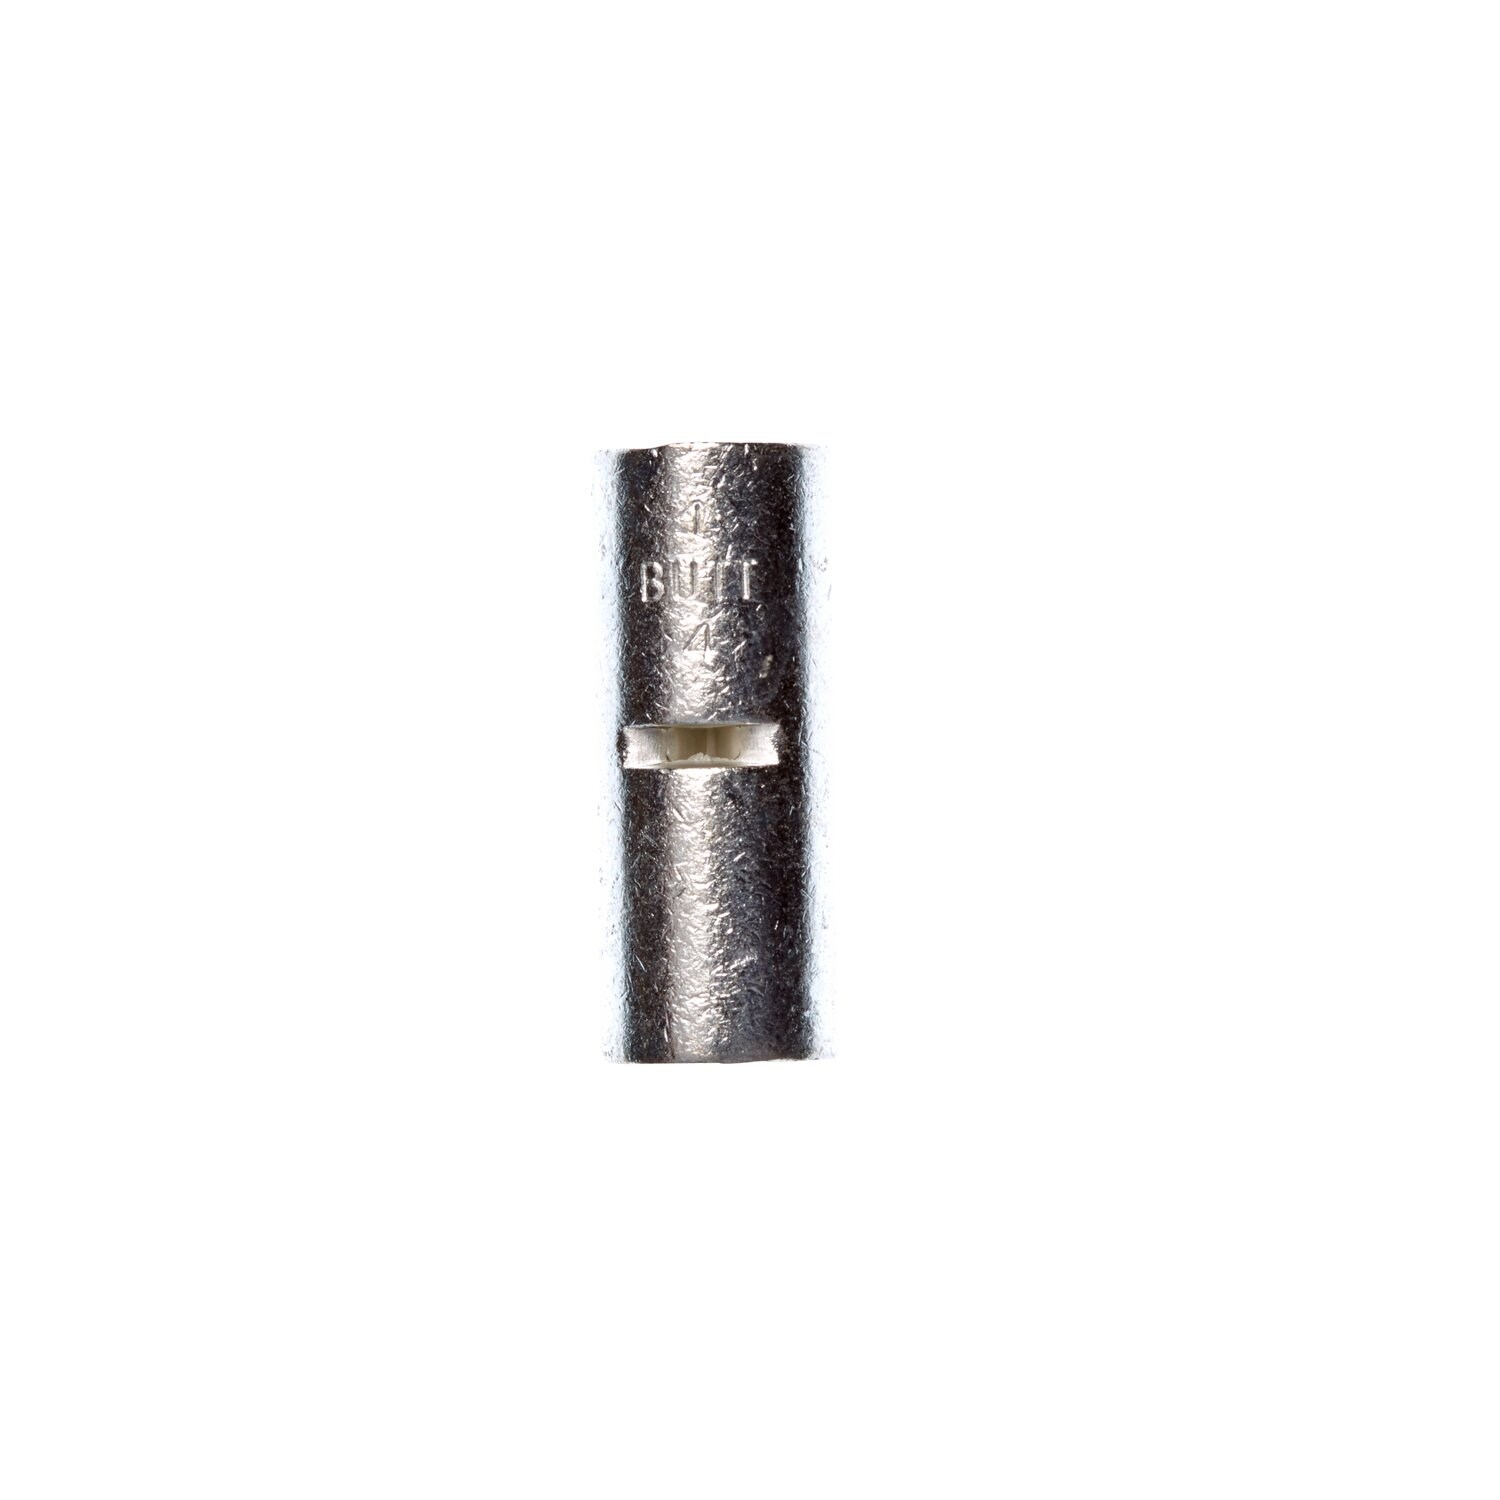 7100164166 - 3M Scotchlok Butt Connector, Non-Insulated Brazed Seam M4BCK, 4 AWG,
built-in wire stop for correct positioning, 200/Case